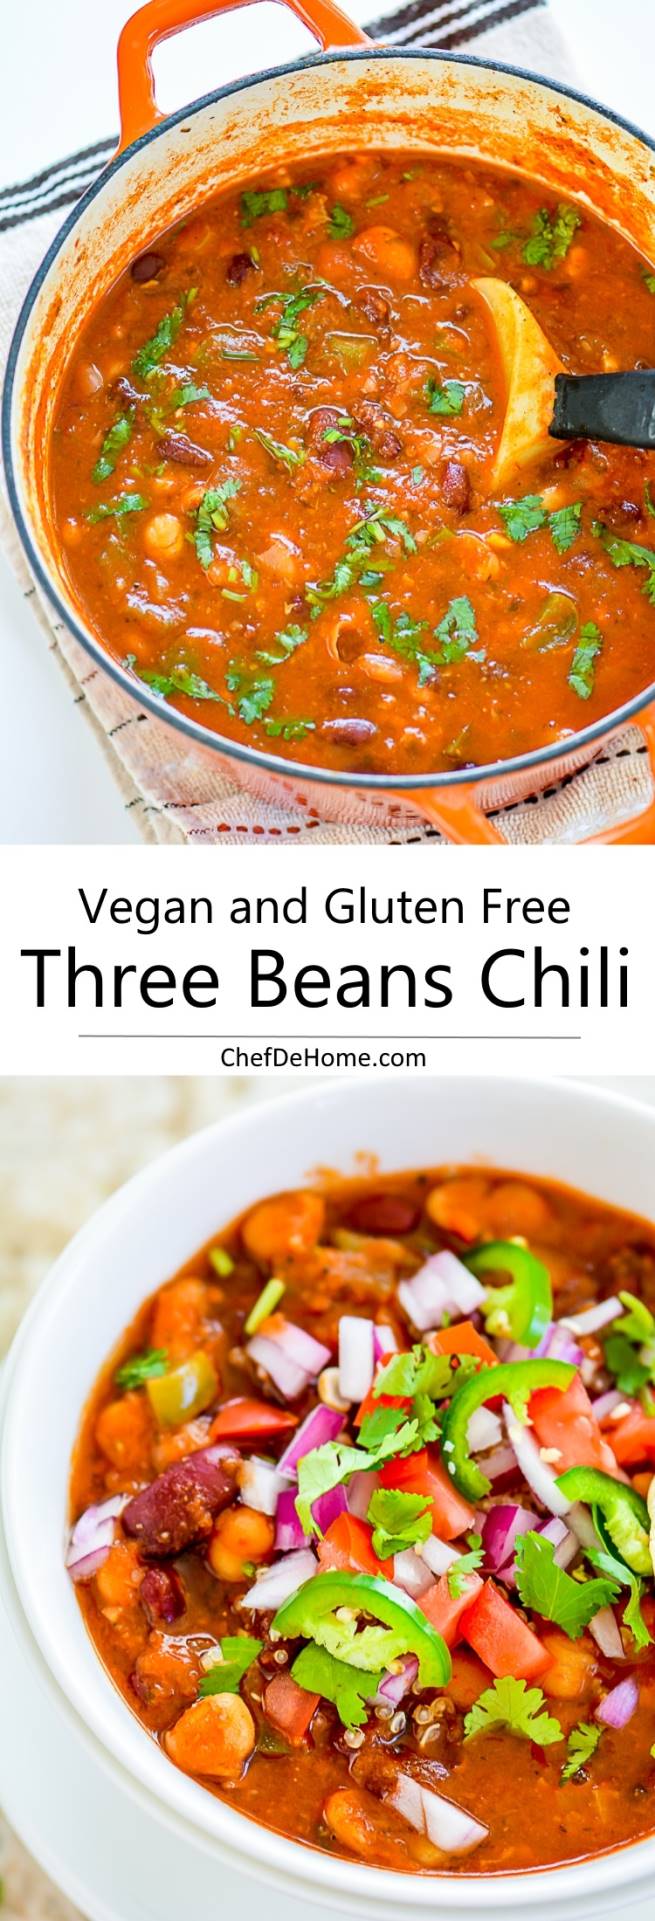 Easy Vegetarian Three Beans Chili with Chickpeas Recipe | ChefDeHome.com